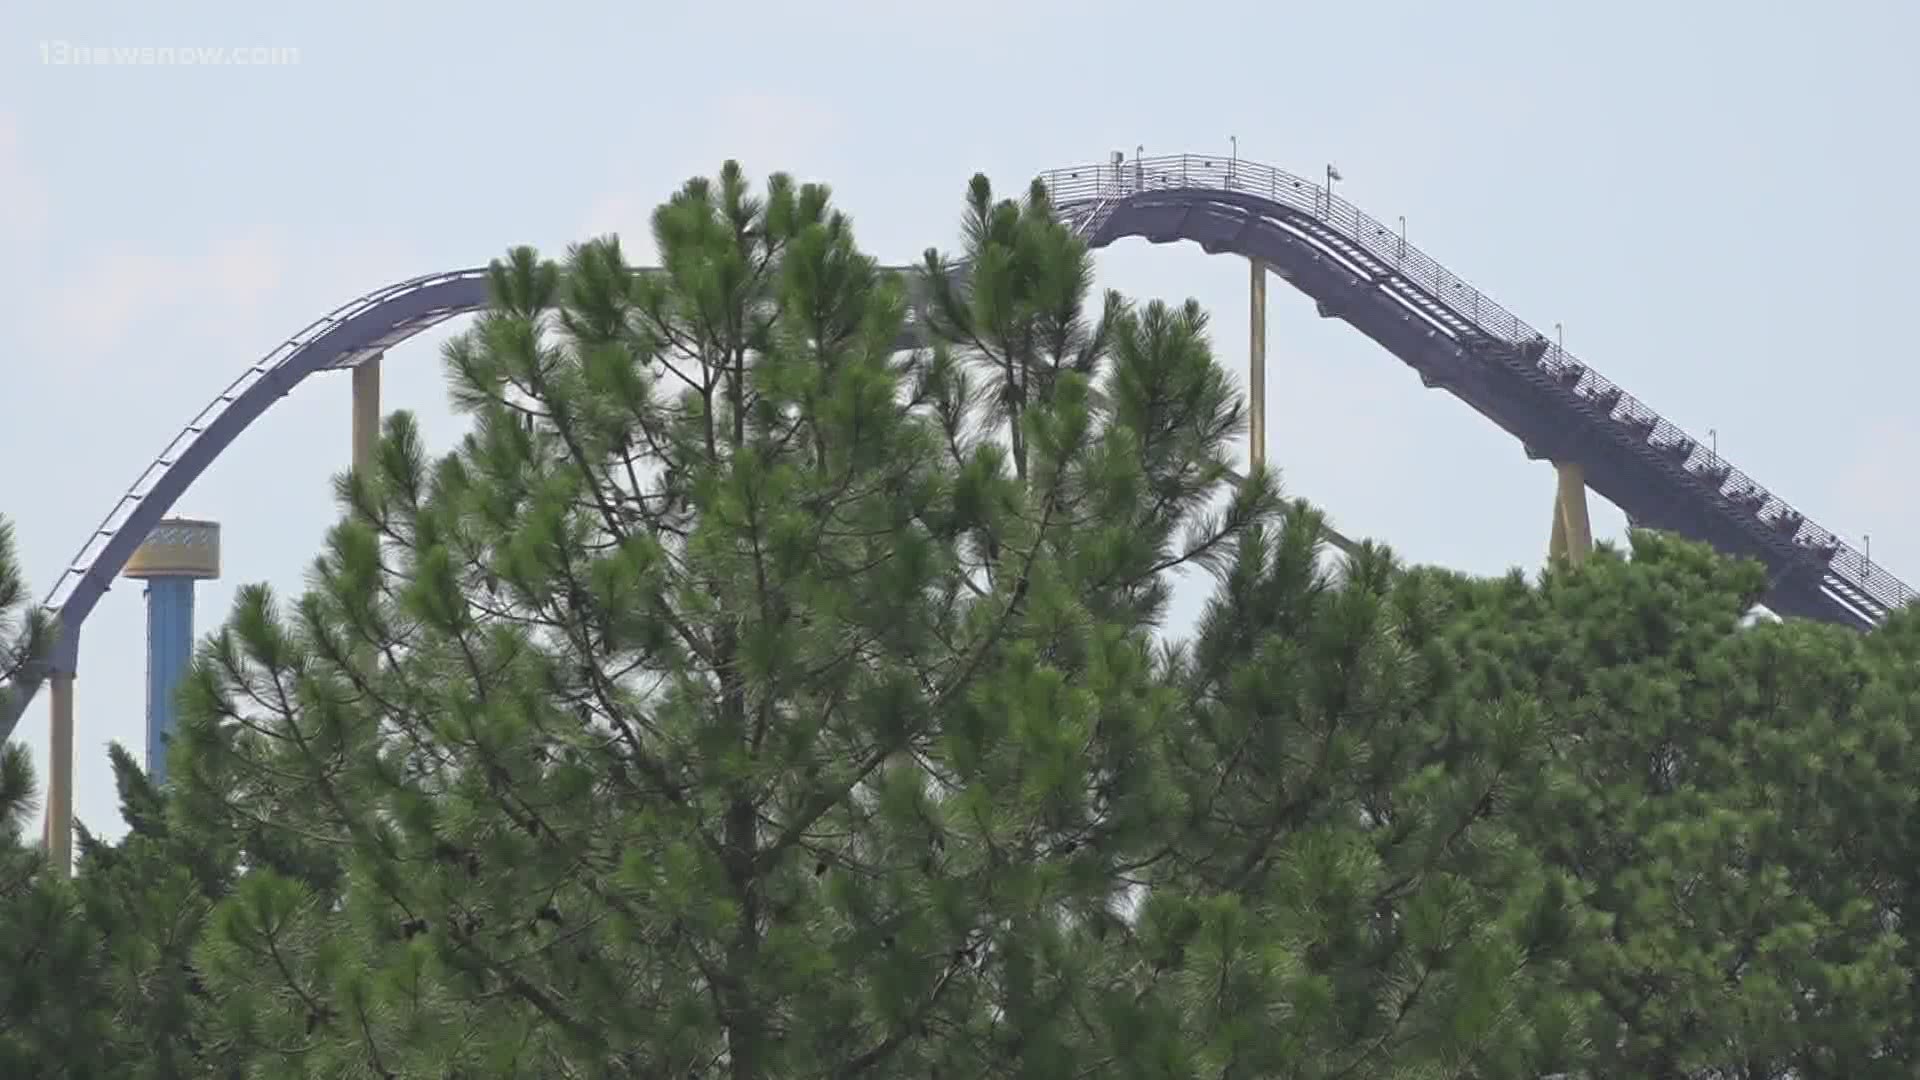 State Senator Tommy Norment is urging the governor to reconsider his decision to cap Busch Gardens Williamsburg's attendance to 1,000 guests.